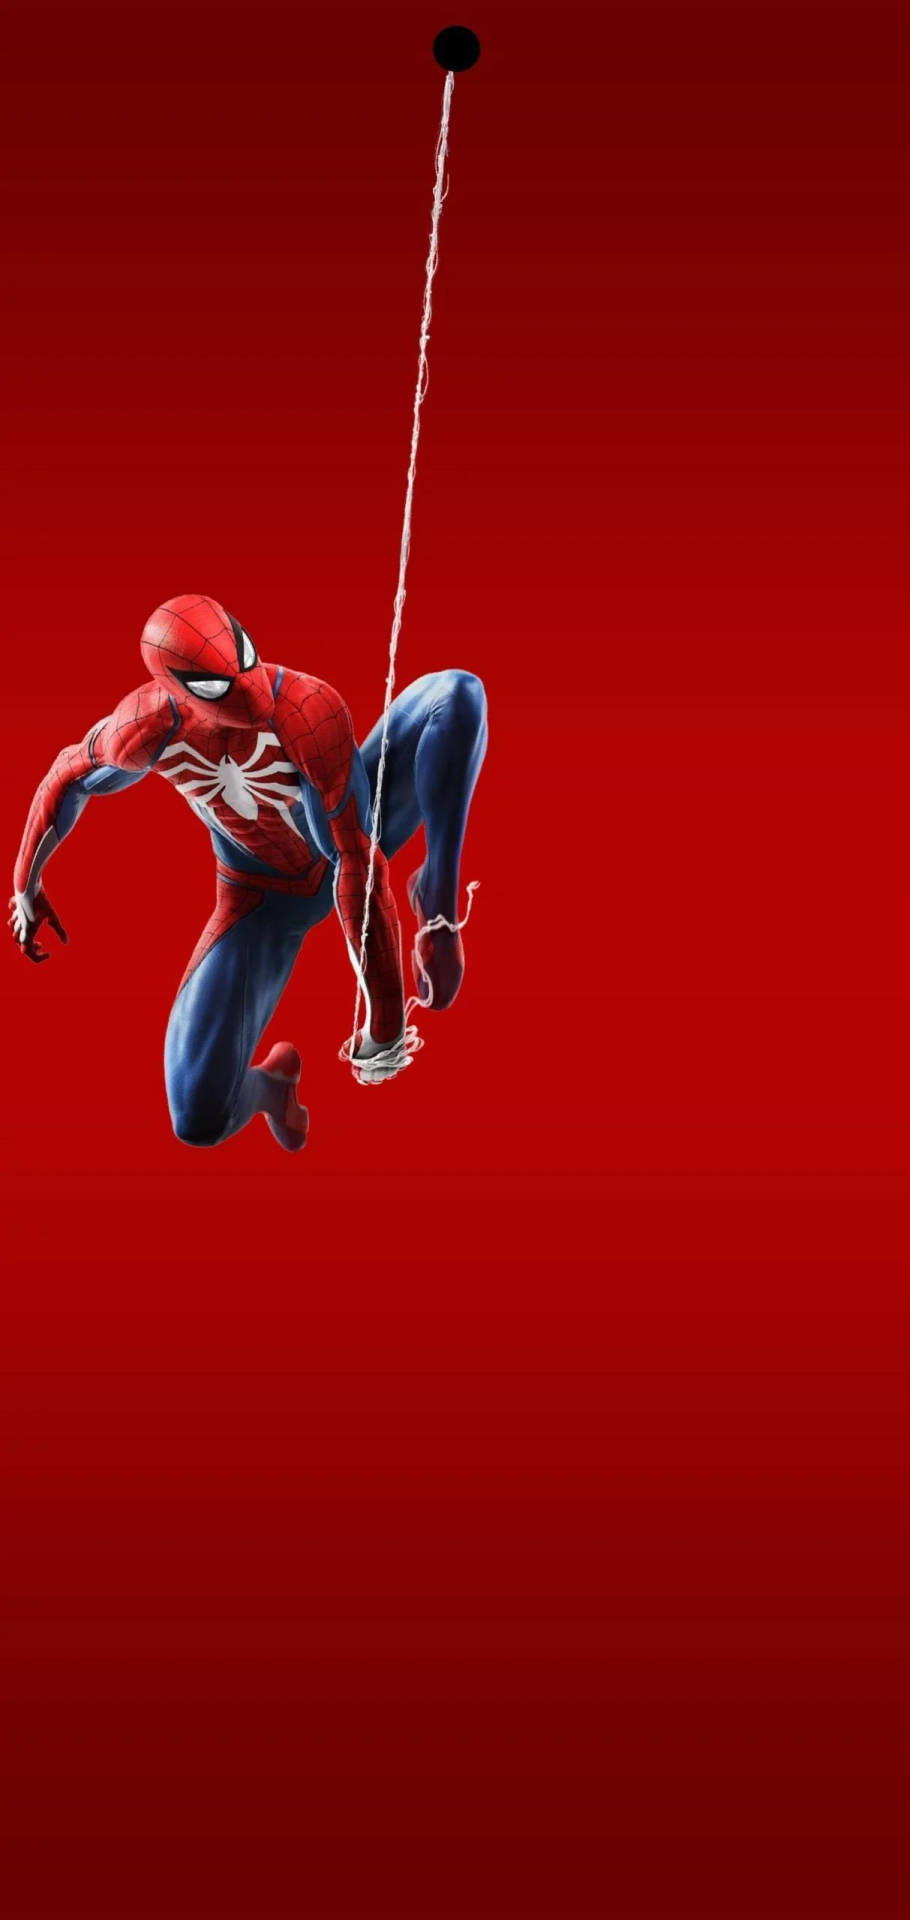 Spiderman Hanging By The Web On The Punch Hole Background